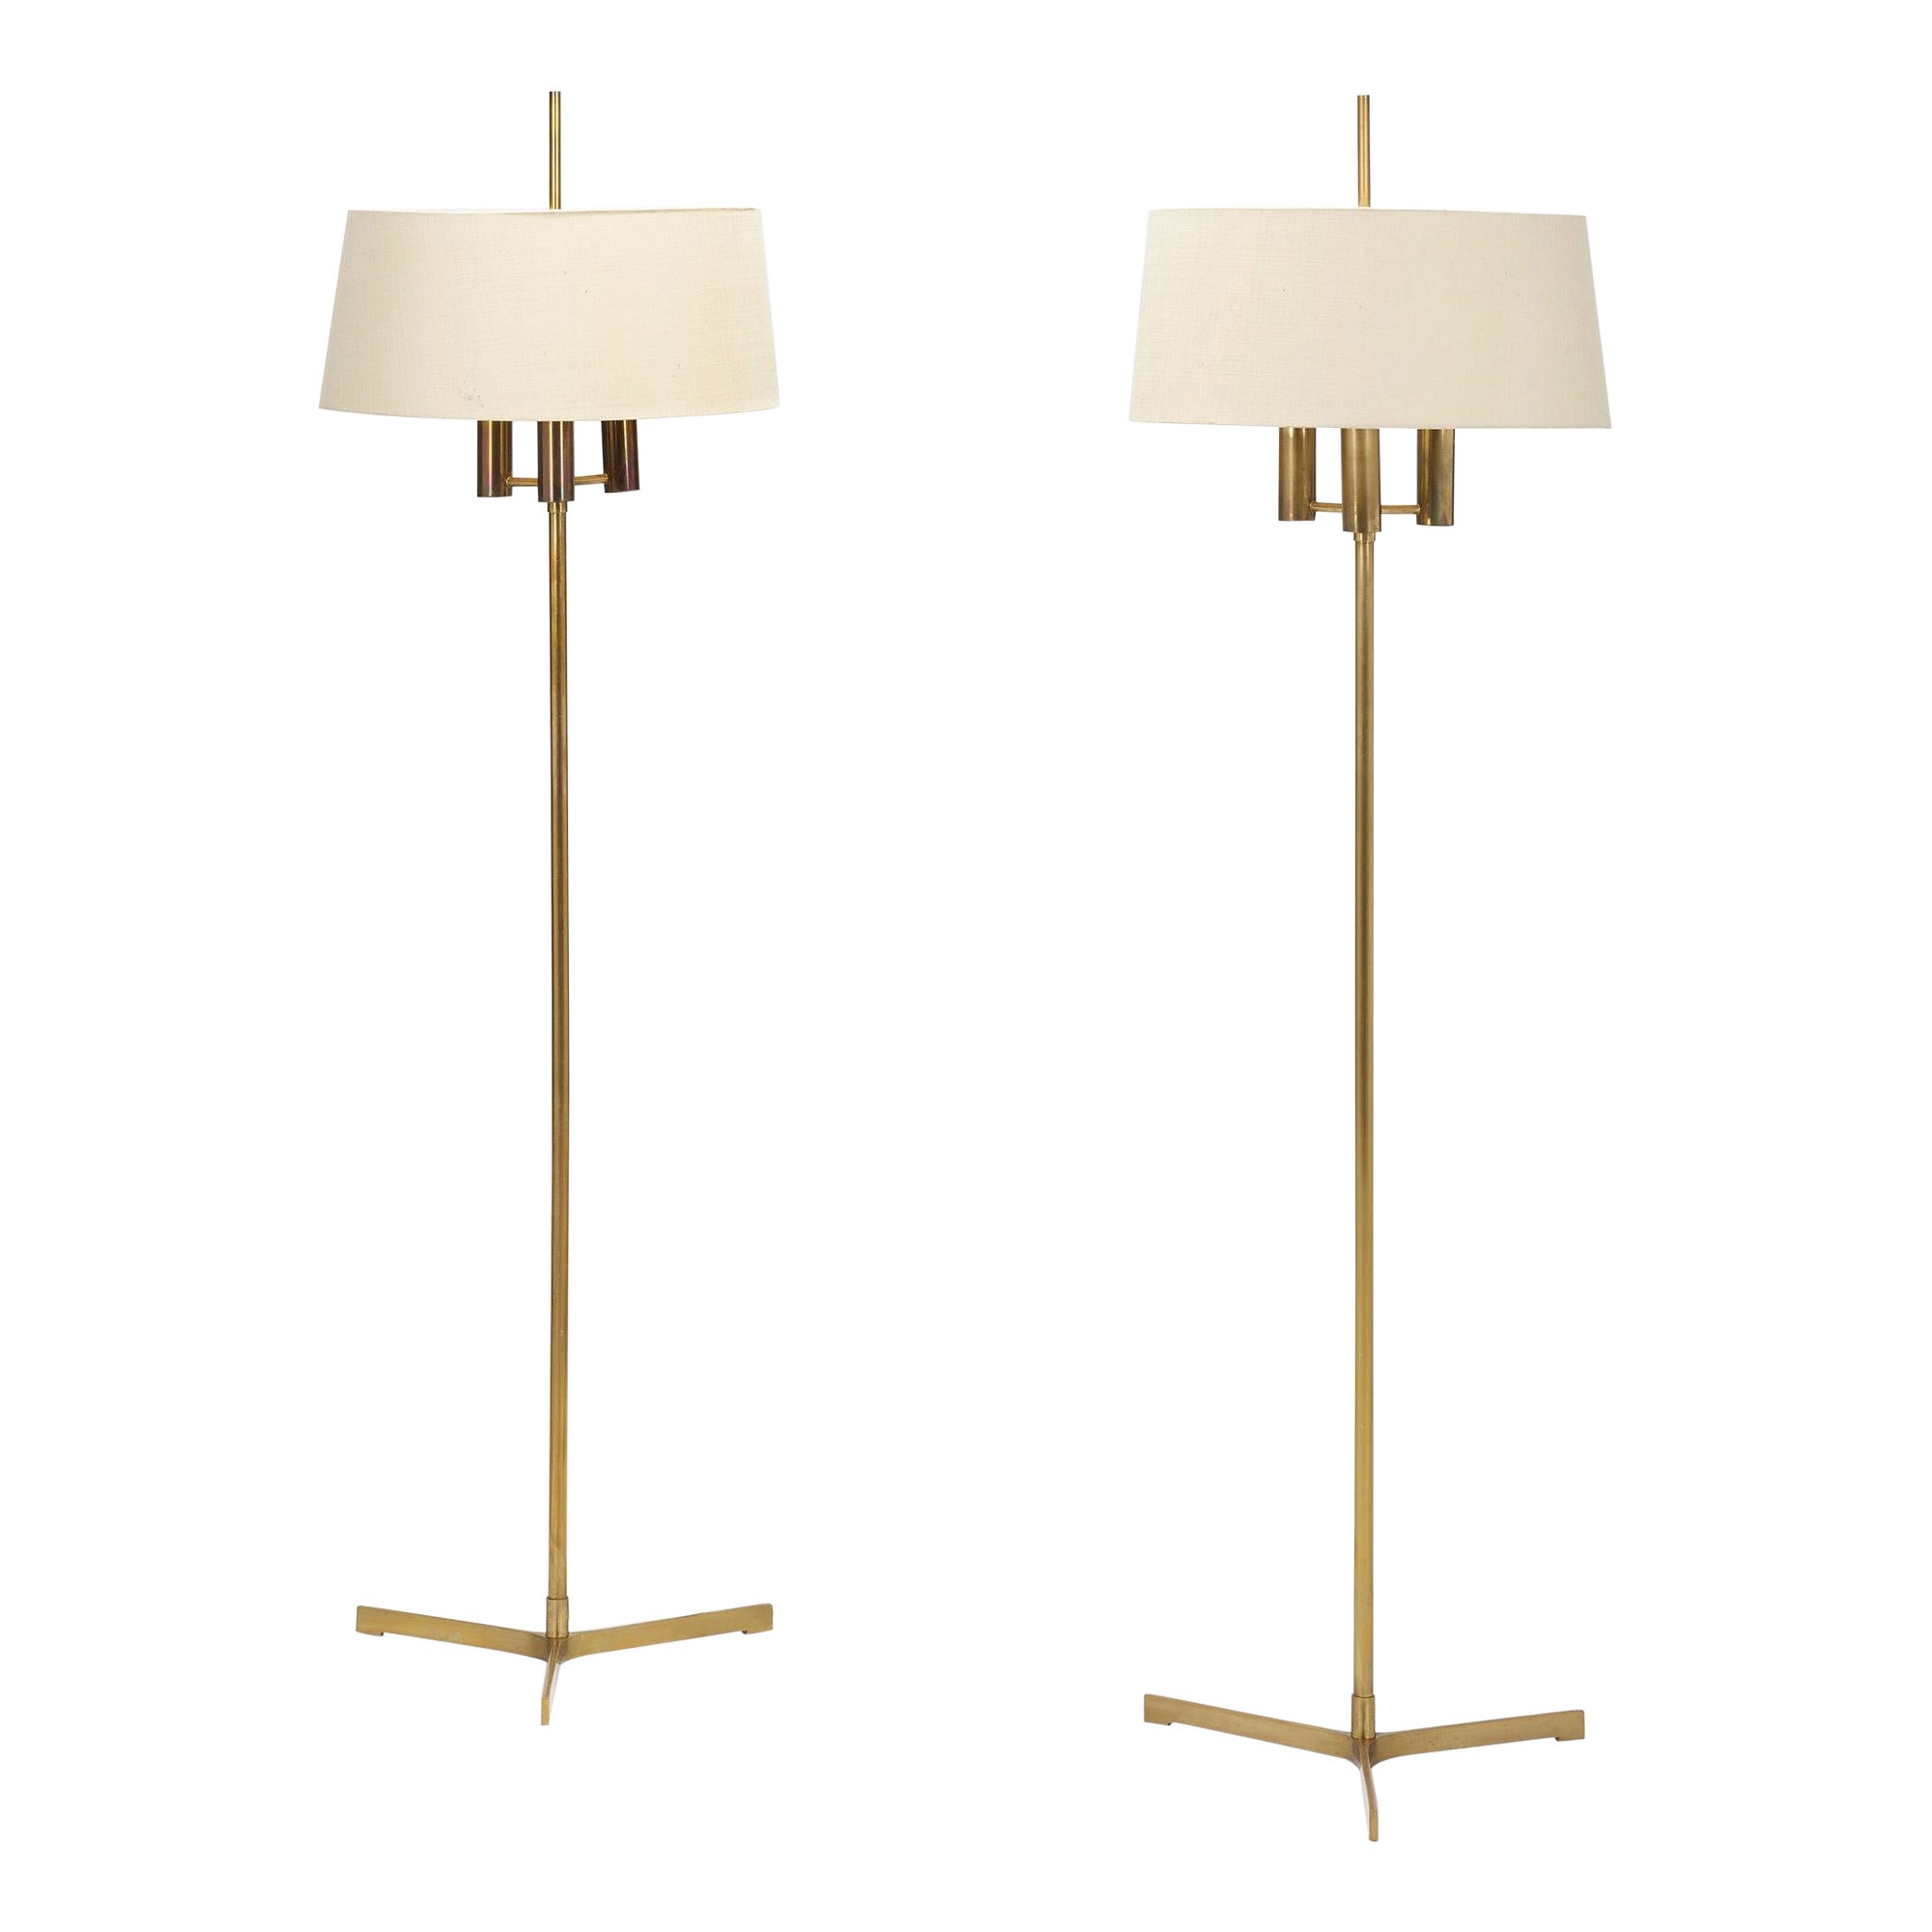 Pair of Floor Lamps by Svend Aage Holm Sørensen, circa 1950 For Sale